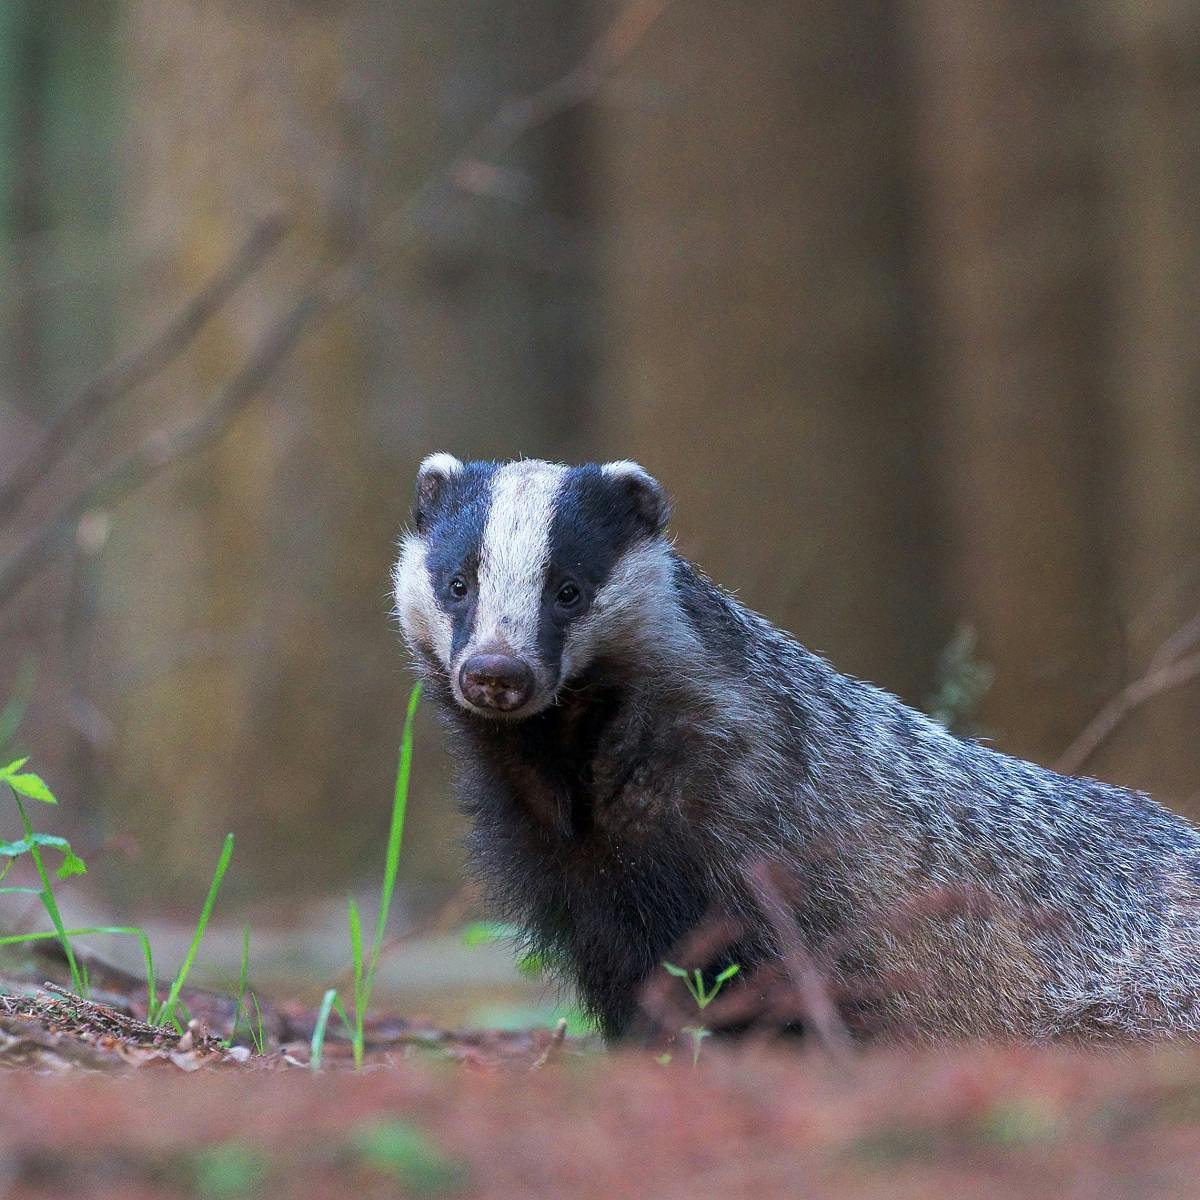 A European badger in an irish woodland. The most misconceived and persecuted member of wildlife in Ireland.